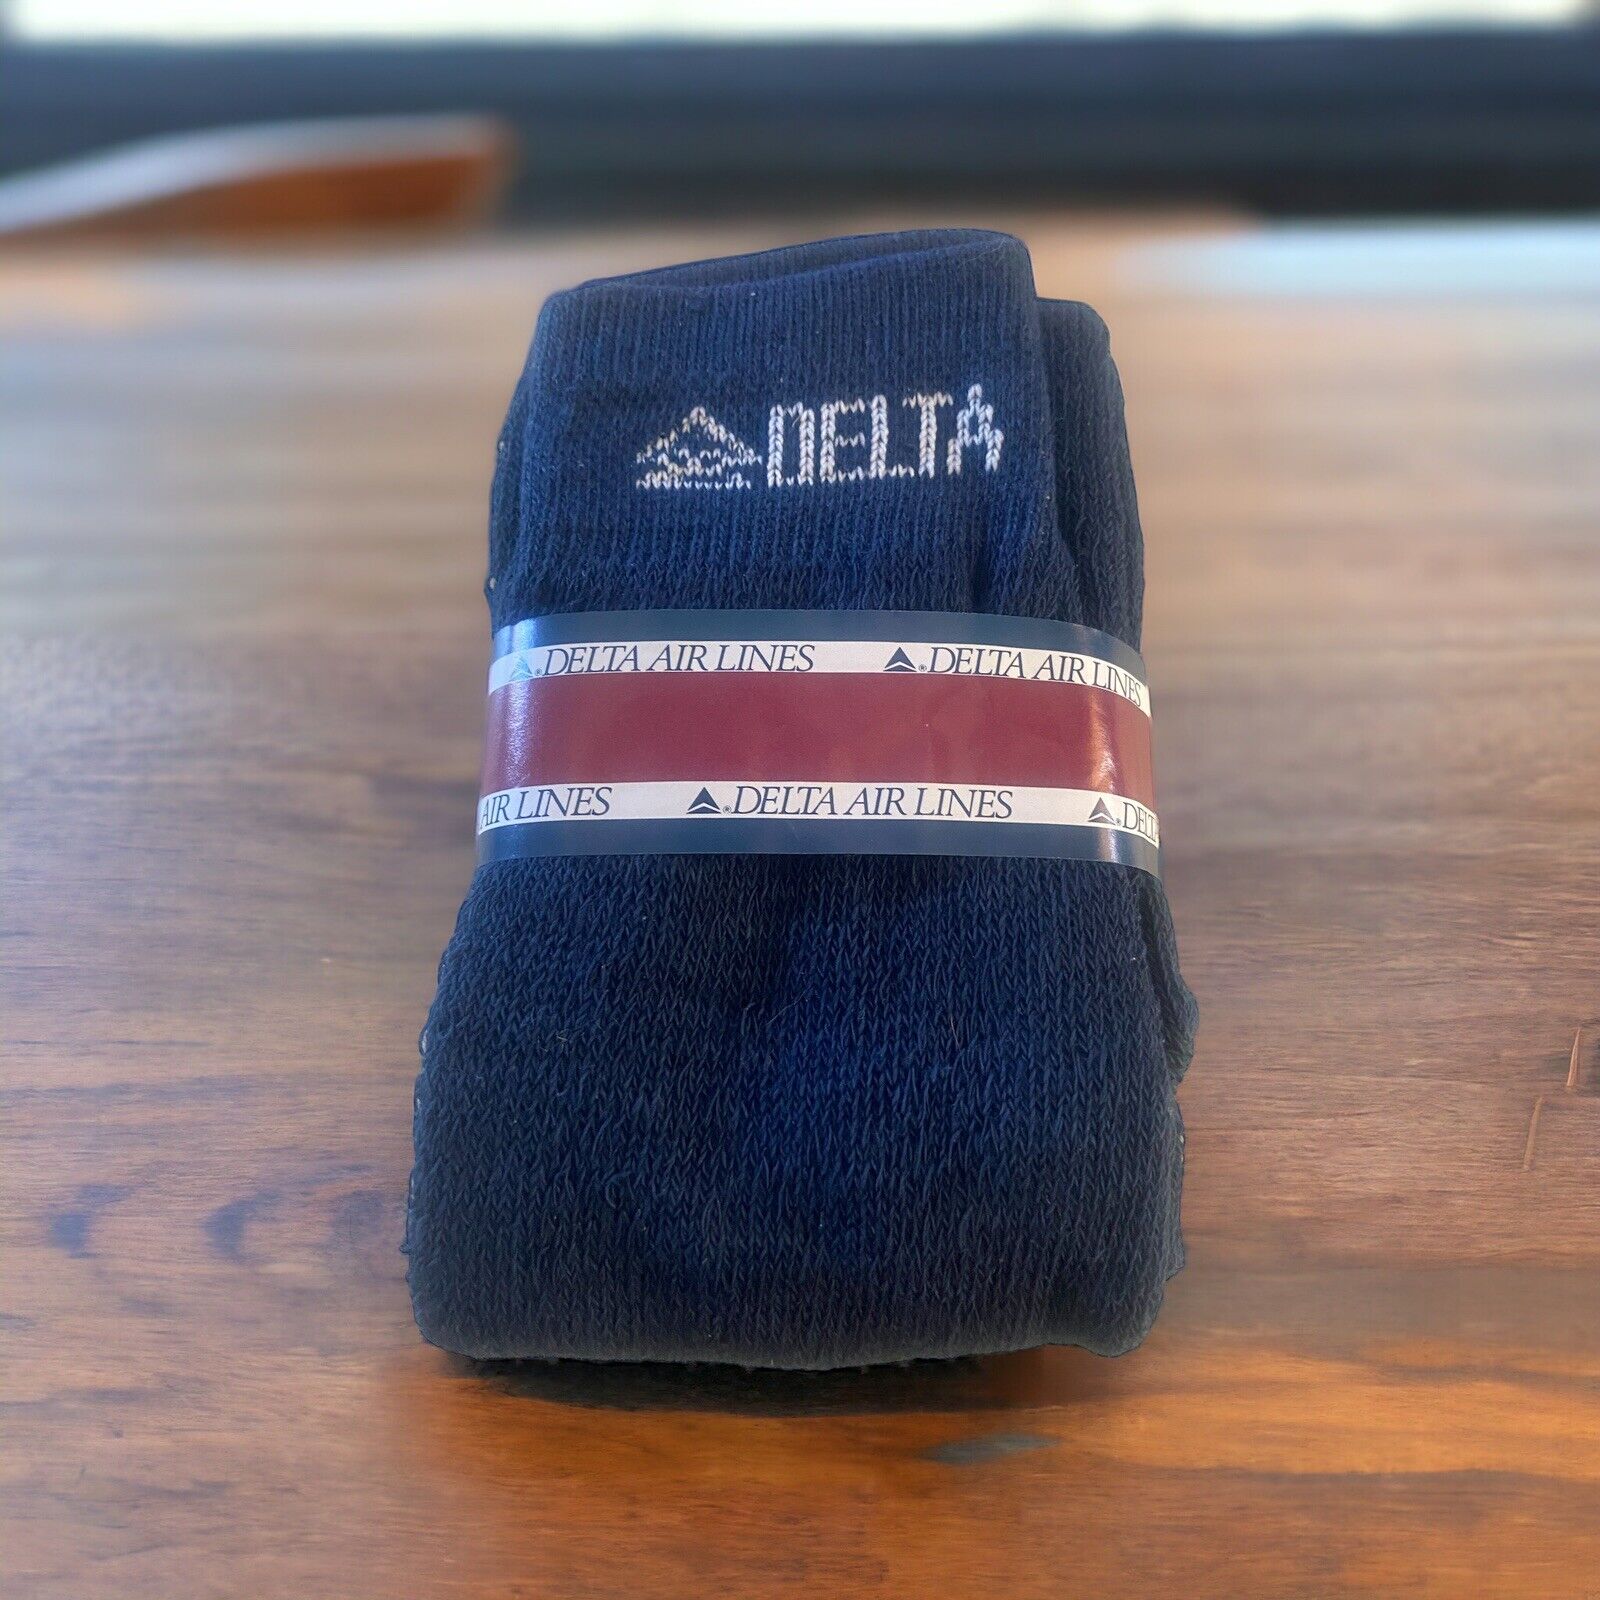 1 Pair Of Delta Air Lines SkyMiles #DeltaMedalionLife Socks Adult One Size